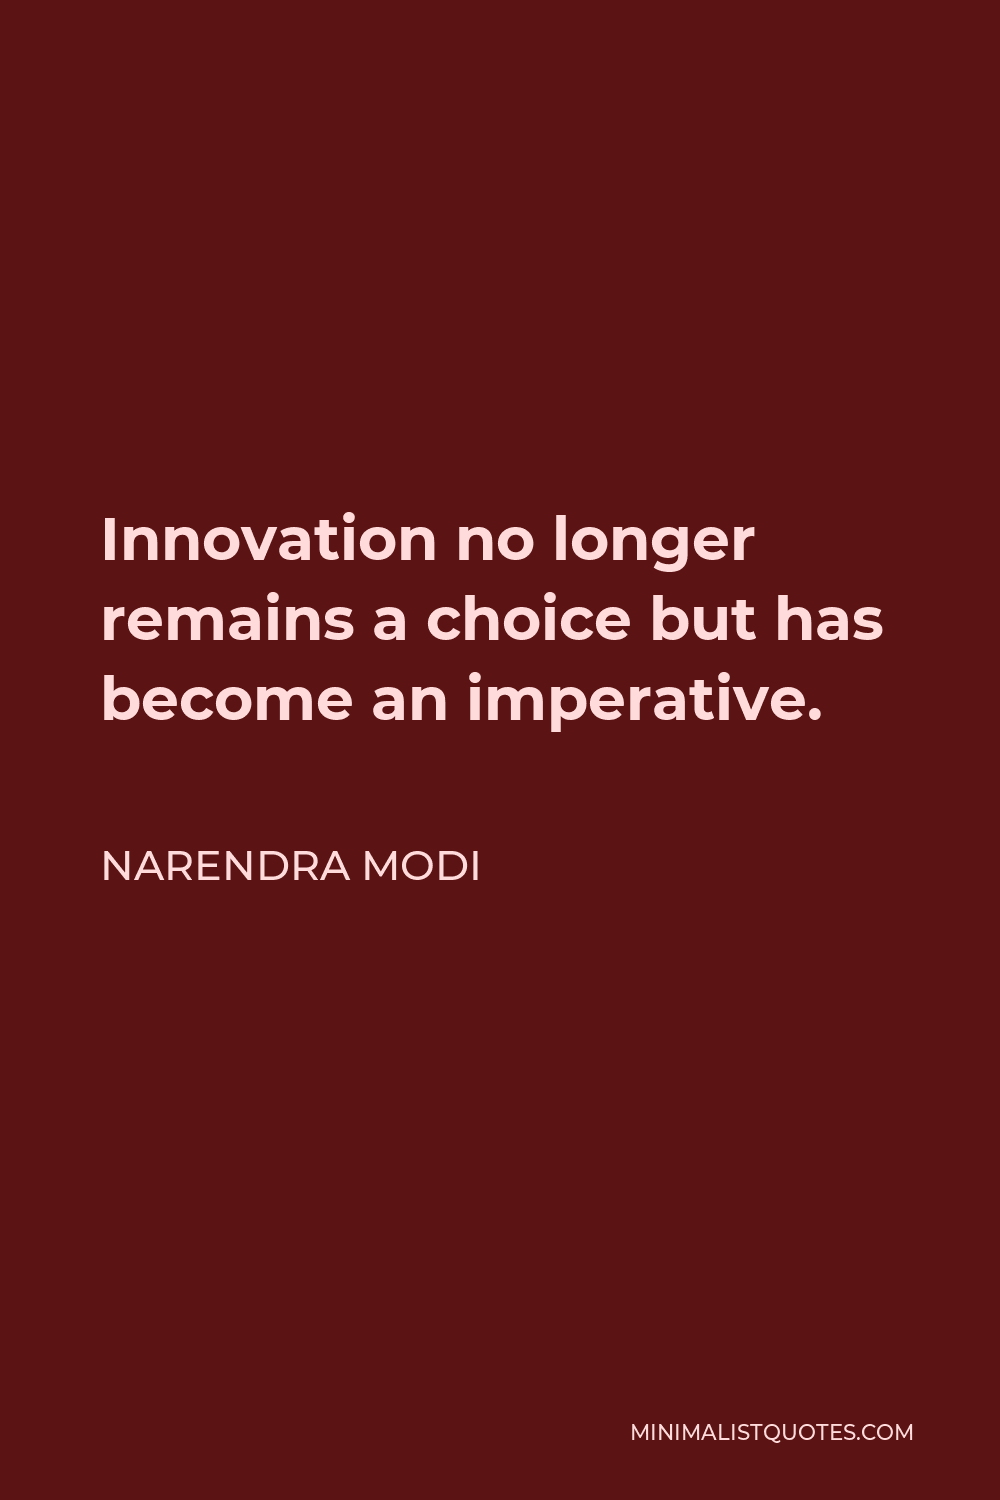 Narendra Modi Quote - Innovation no longer remains a choice but has become an imperative.